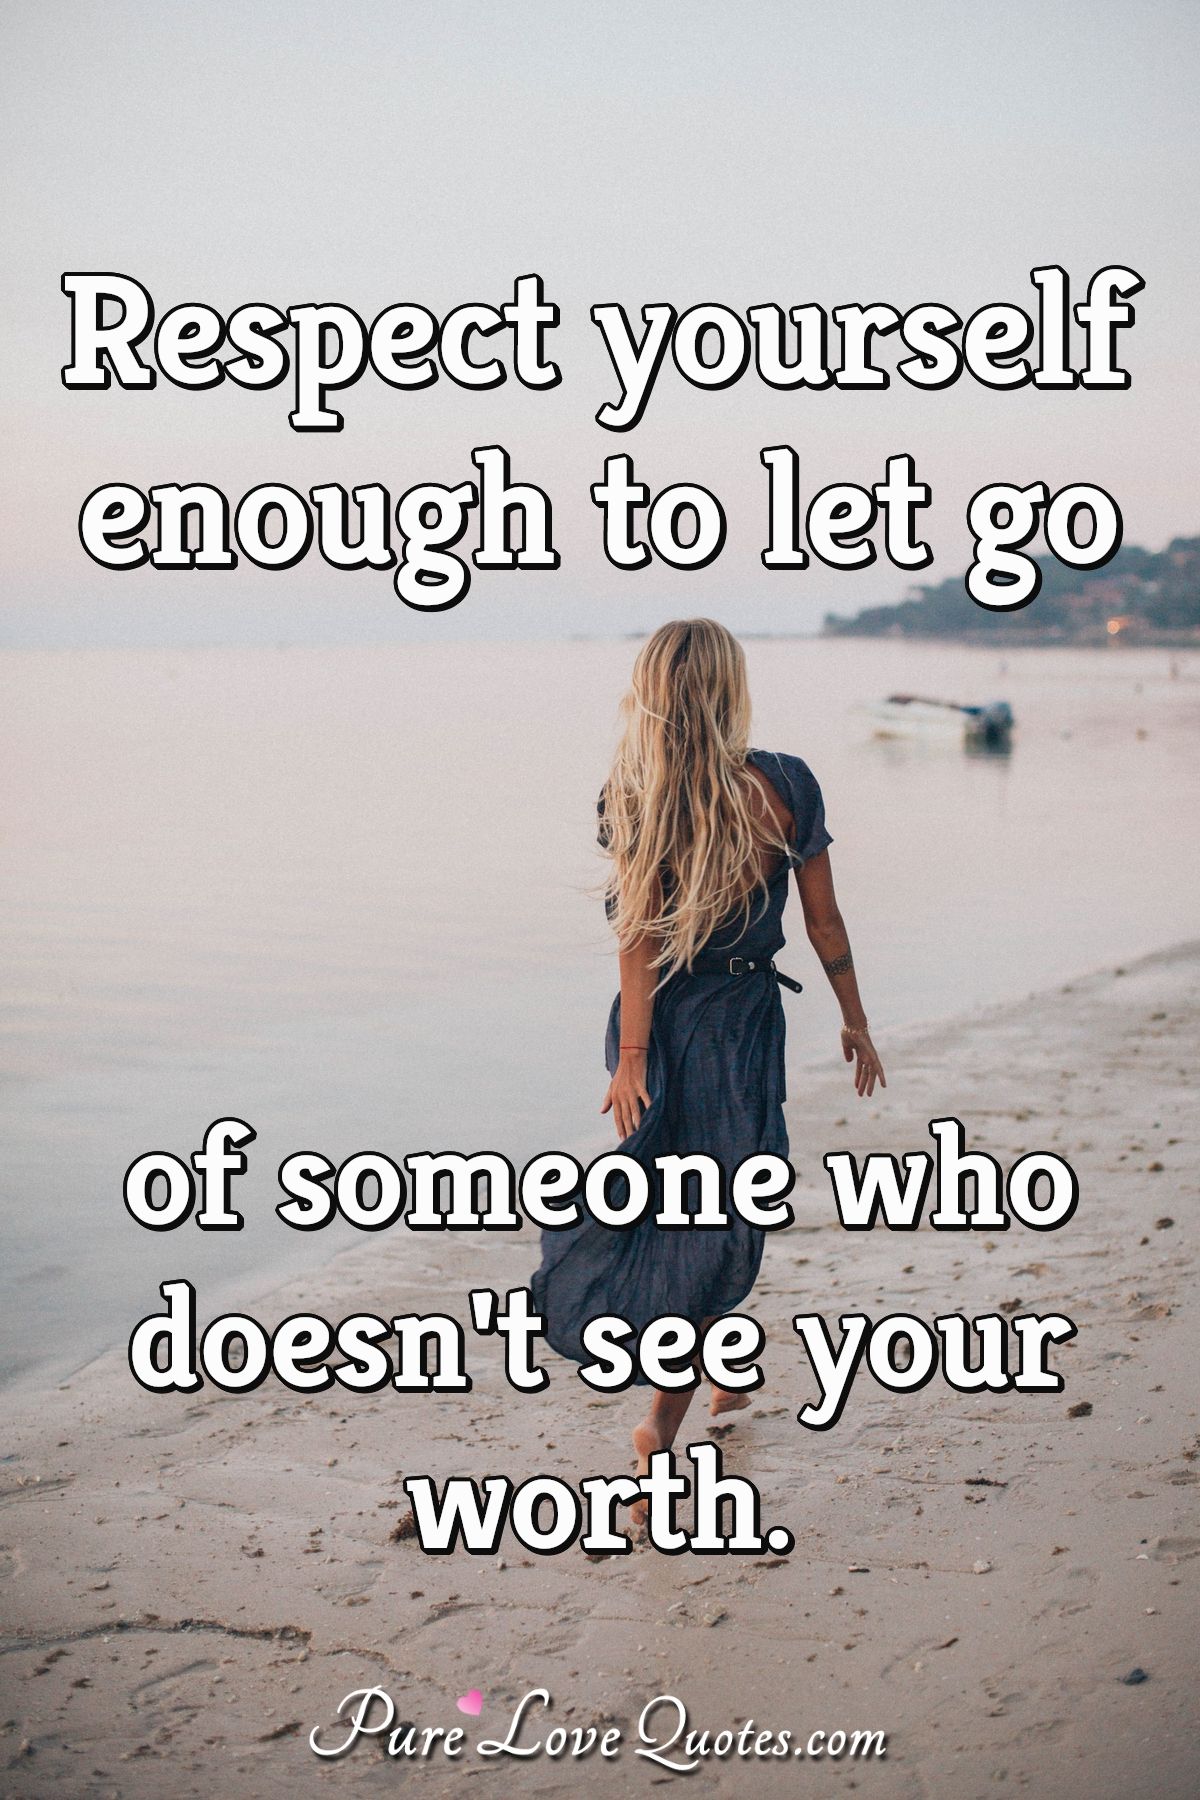 Respect yourself enough to let go of someone who doesn't see your worth